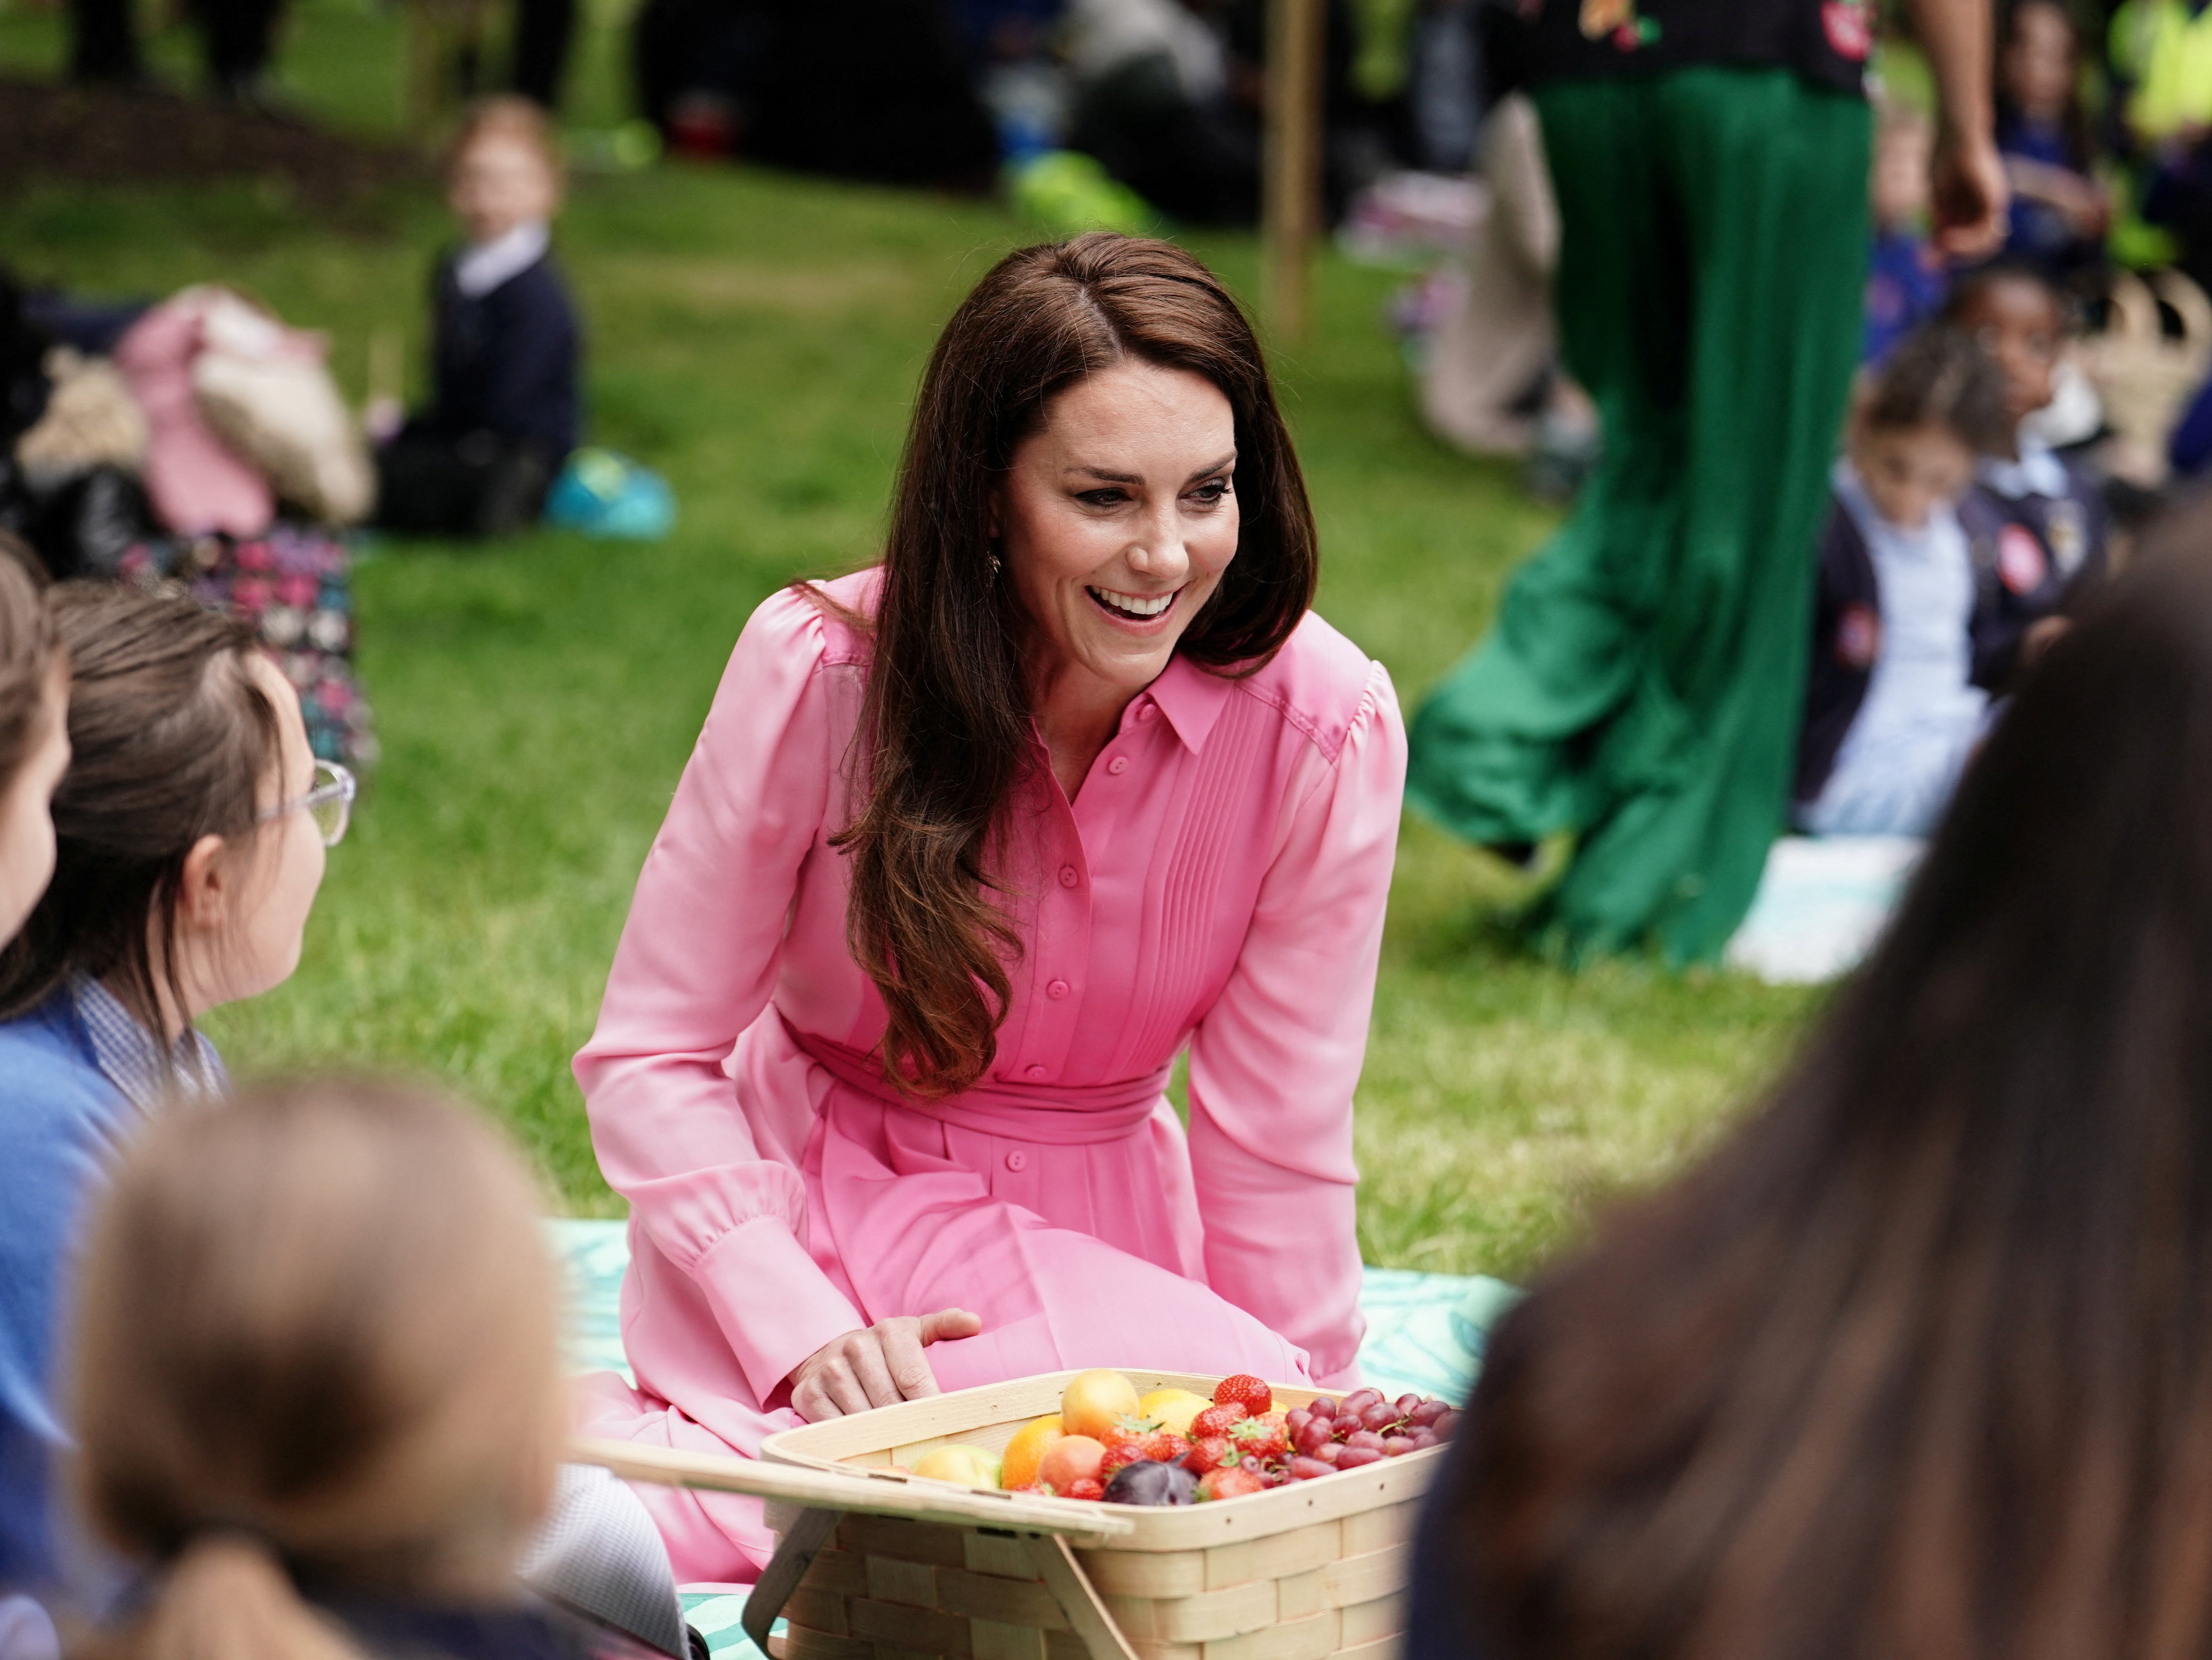 The Princess of Wales with pupils from schools taking part in the first Children's Picnic at the RHS Chelsea Flower Show, at the Royal Hospital Chelsea, London